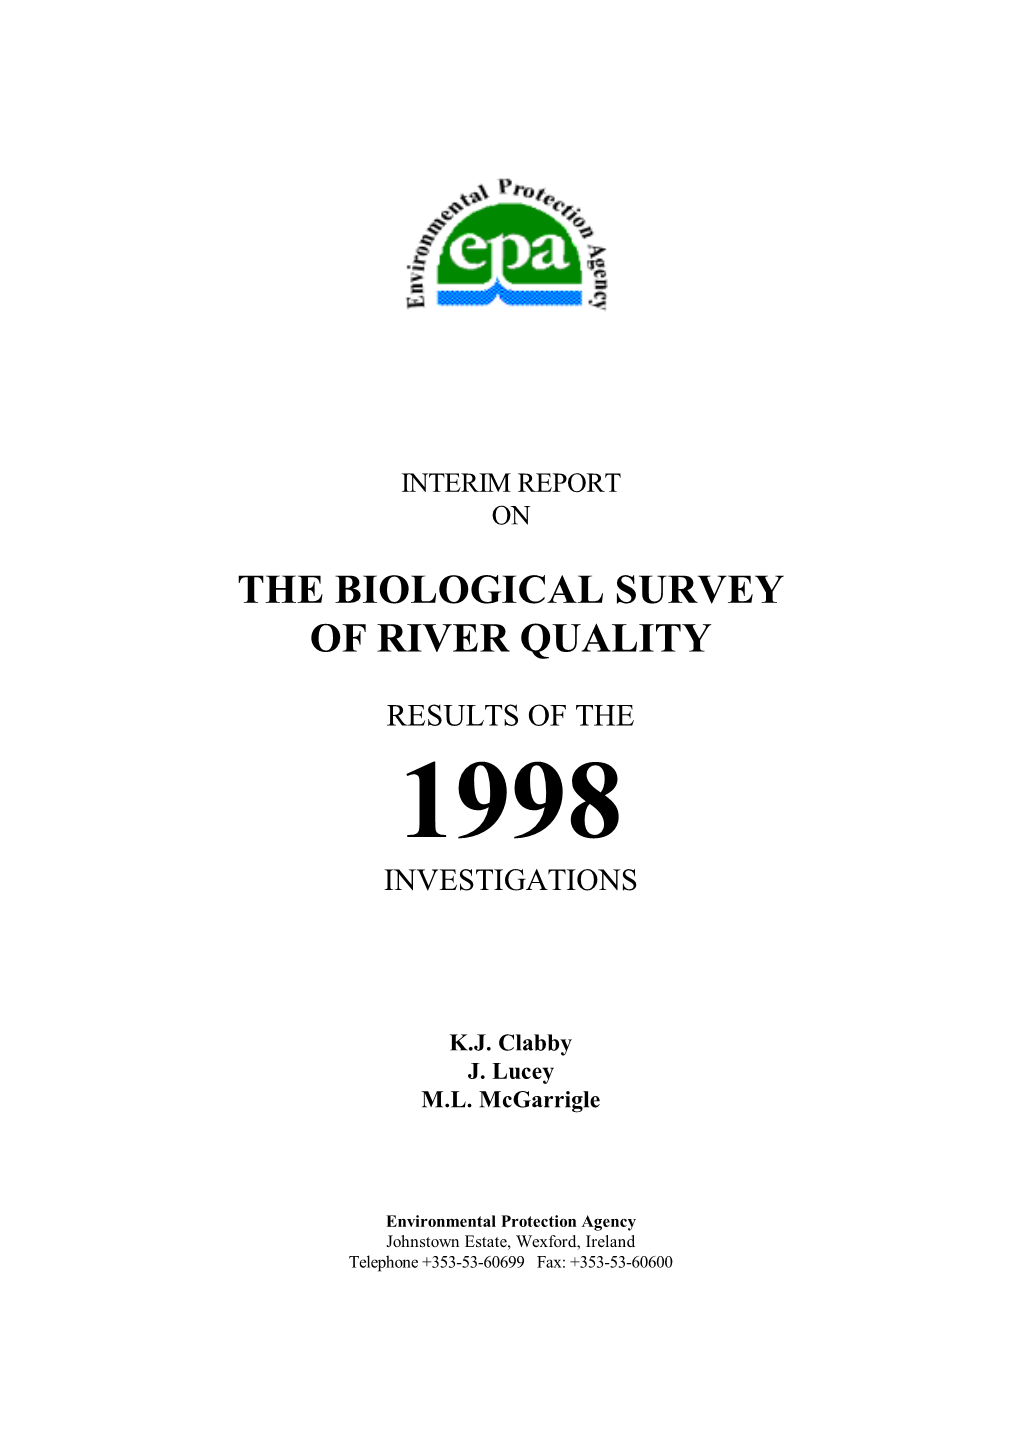 The Biological Survey of River Quality